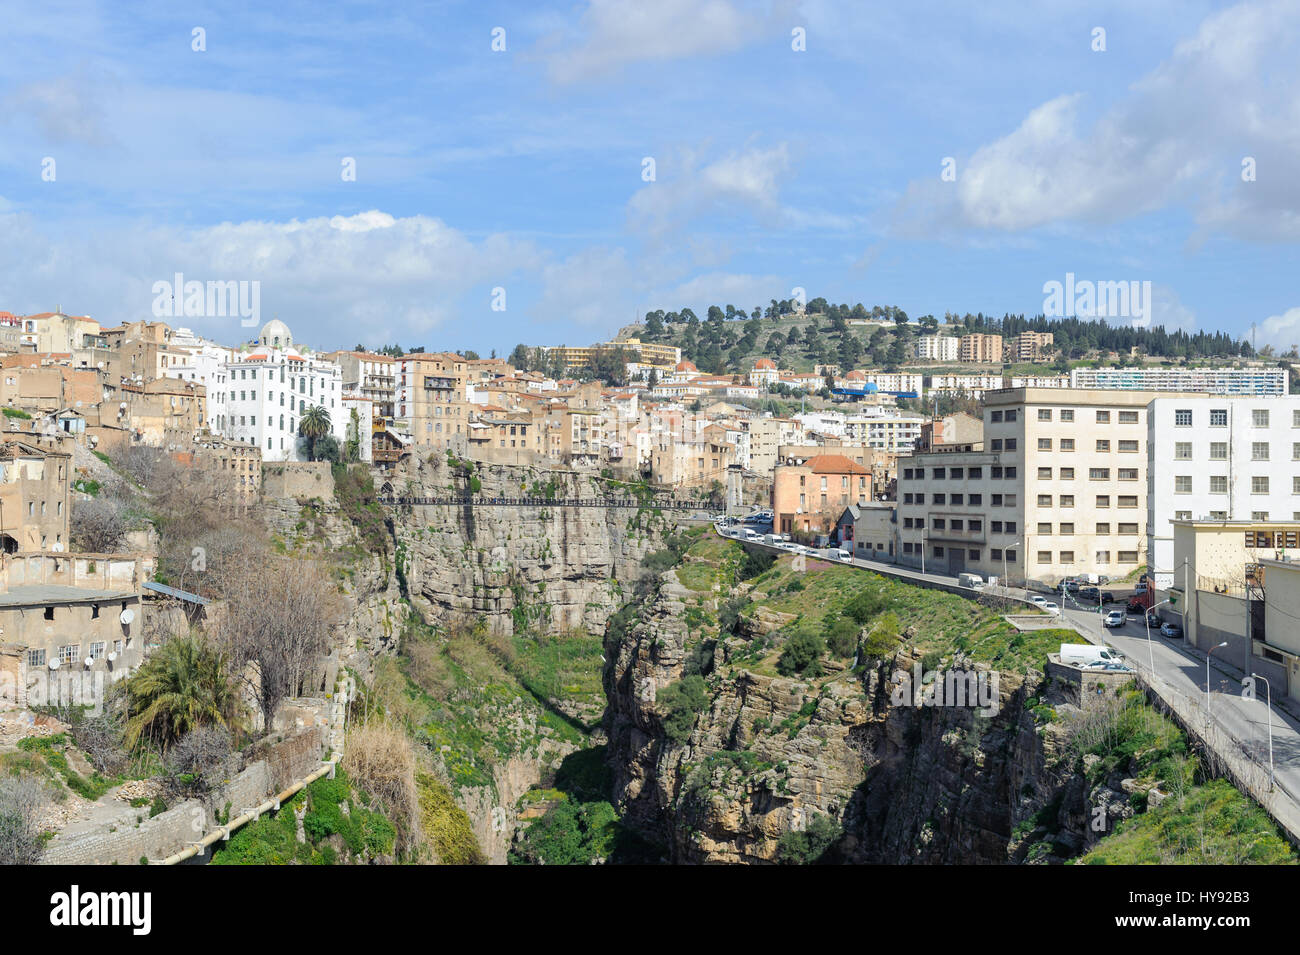 CONSTANTINE, ALGERIA - MAR 7, 2017: Sidi Rasheed Bridge part of the Rhumel siting high on the rocks with a view of the old city.These bridges exist as Stock Photo